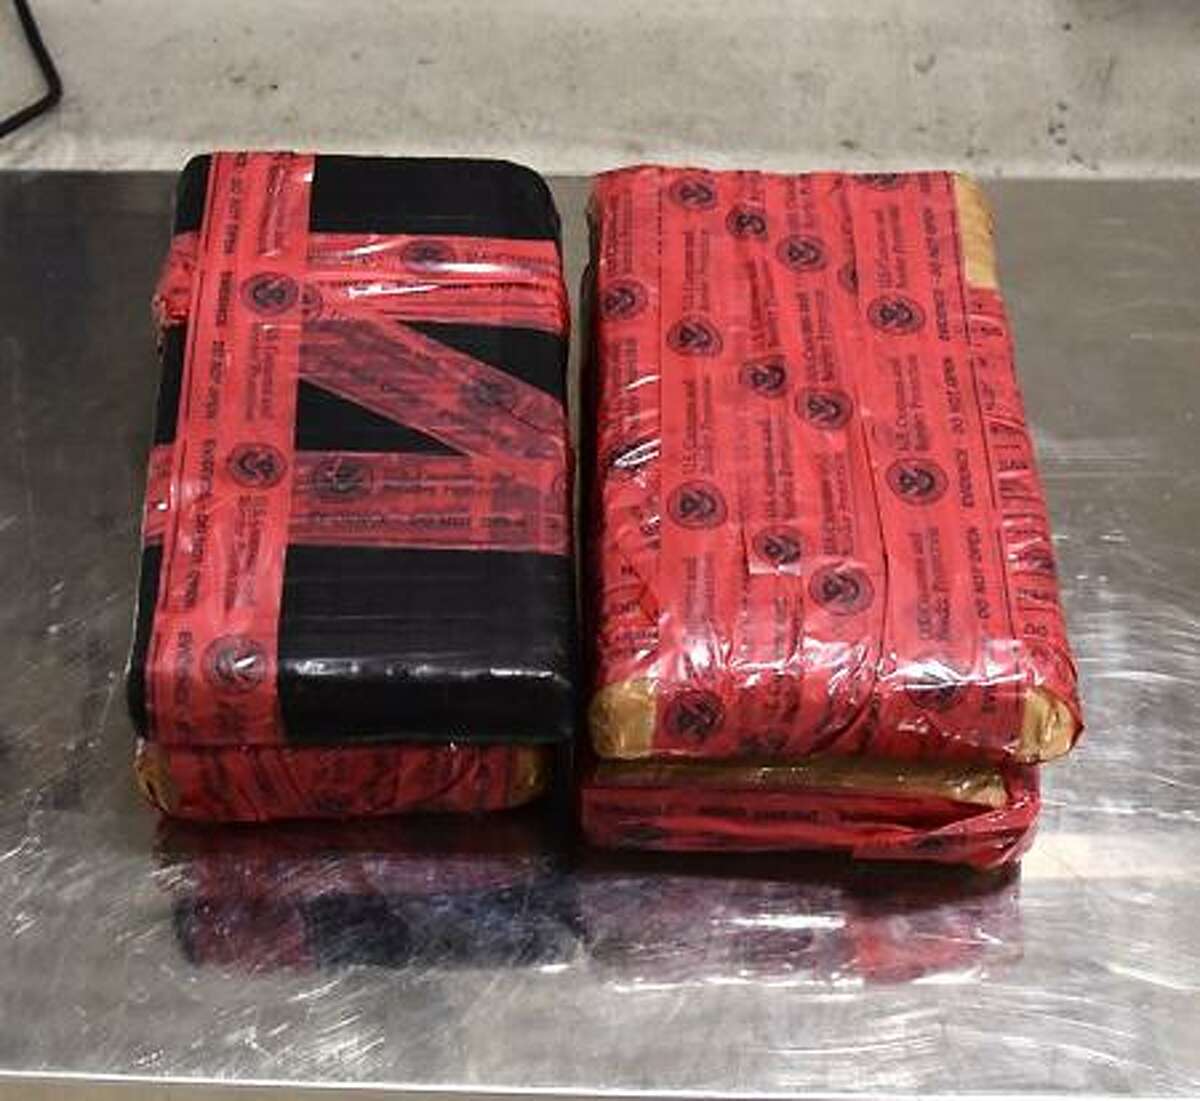 U.S. Customs and Border Protection officers seize $1.2 million in hard narcotics in two enforcement actions at Laredo Port of Entry.